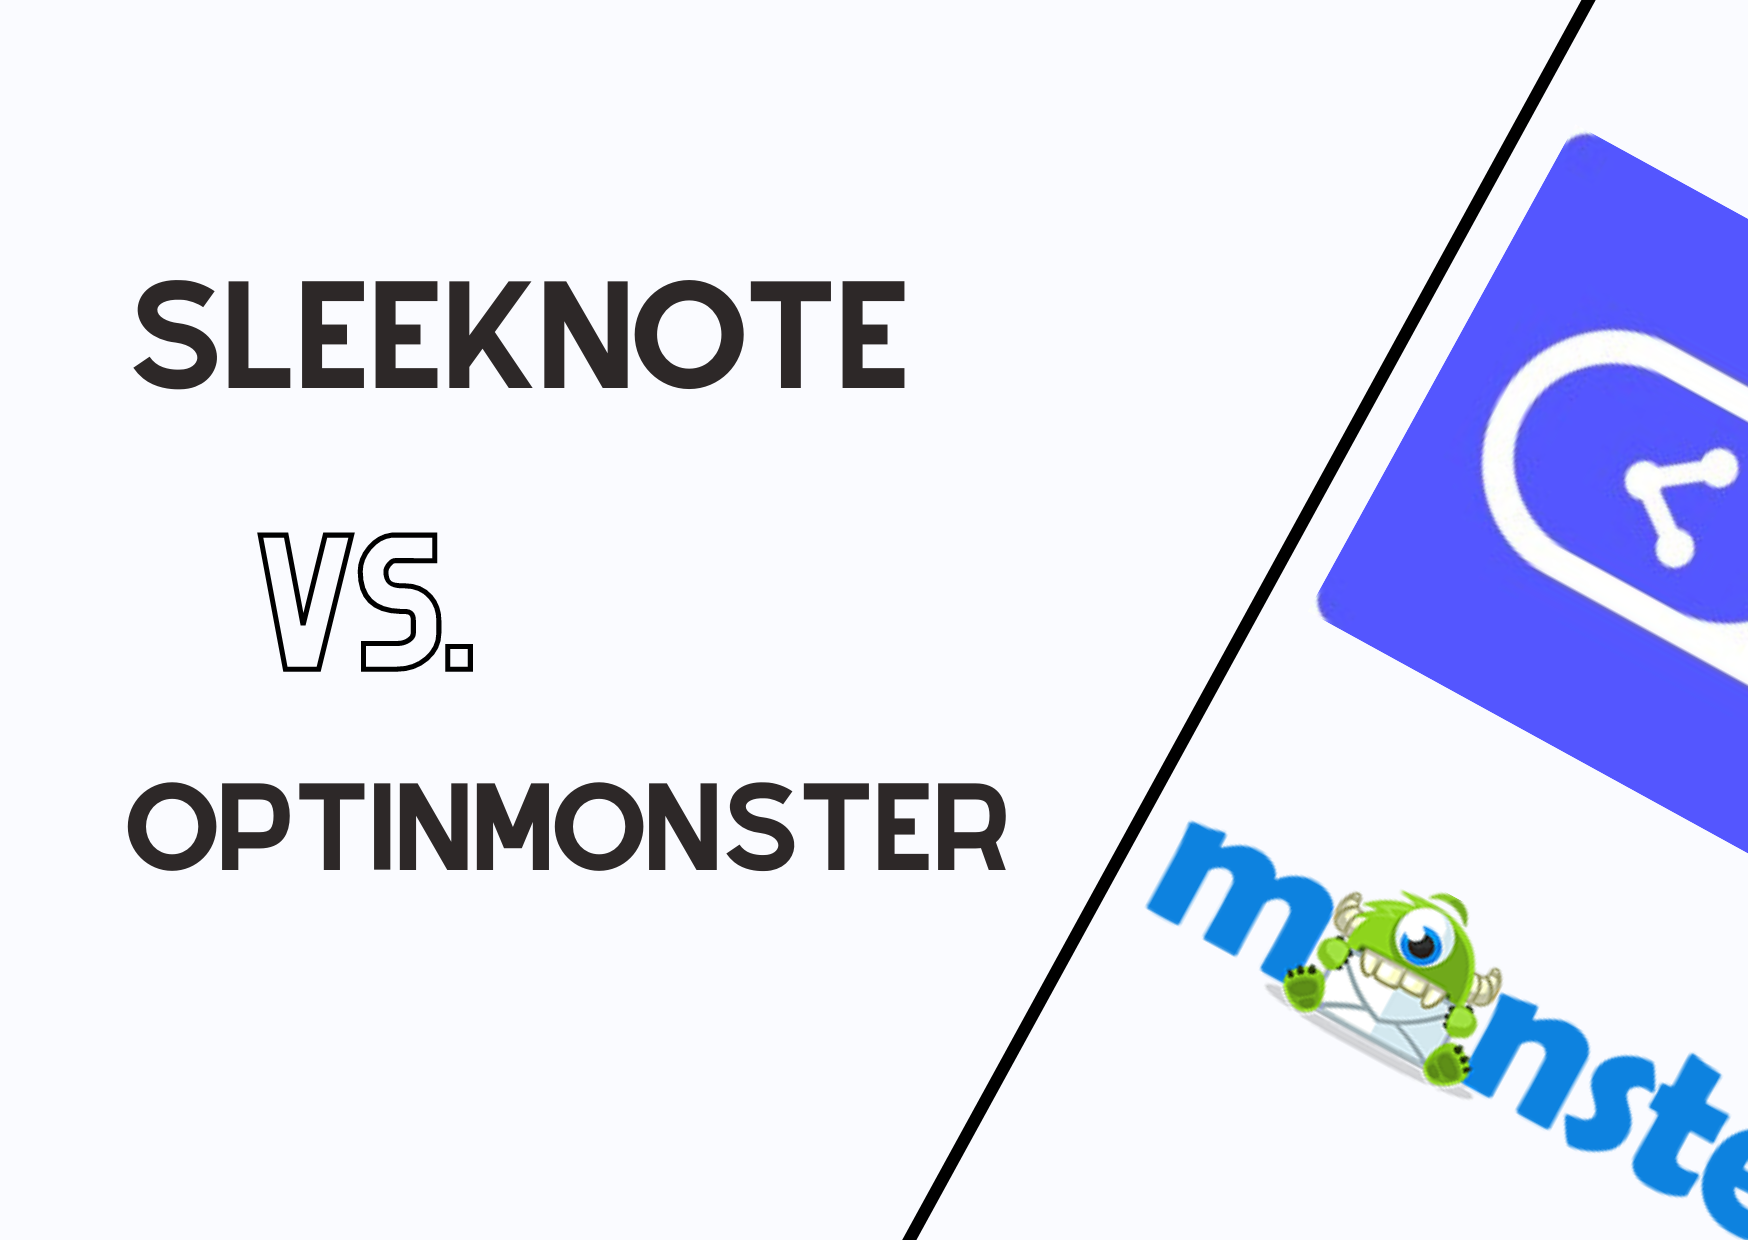 the Sleeknote vs. OptinMonster comparison with the logos banner